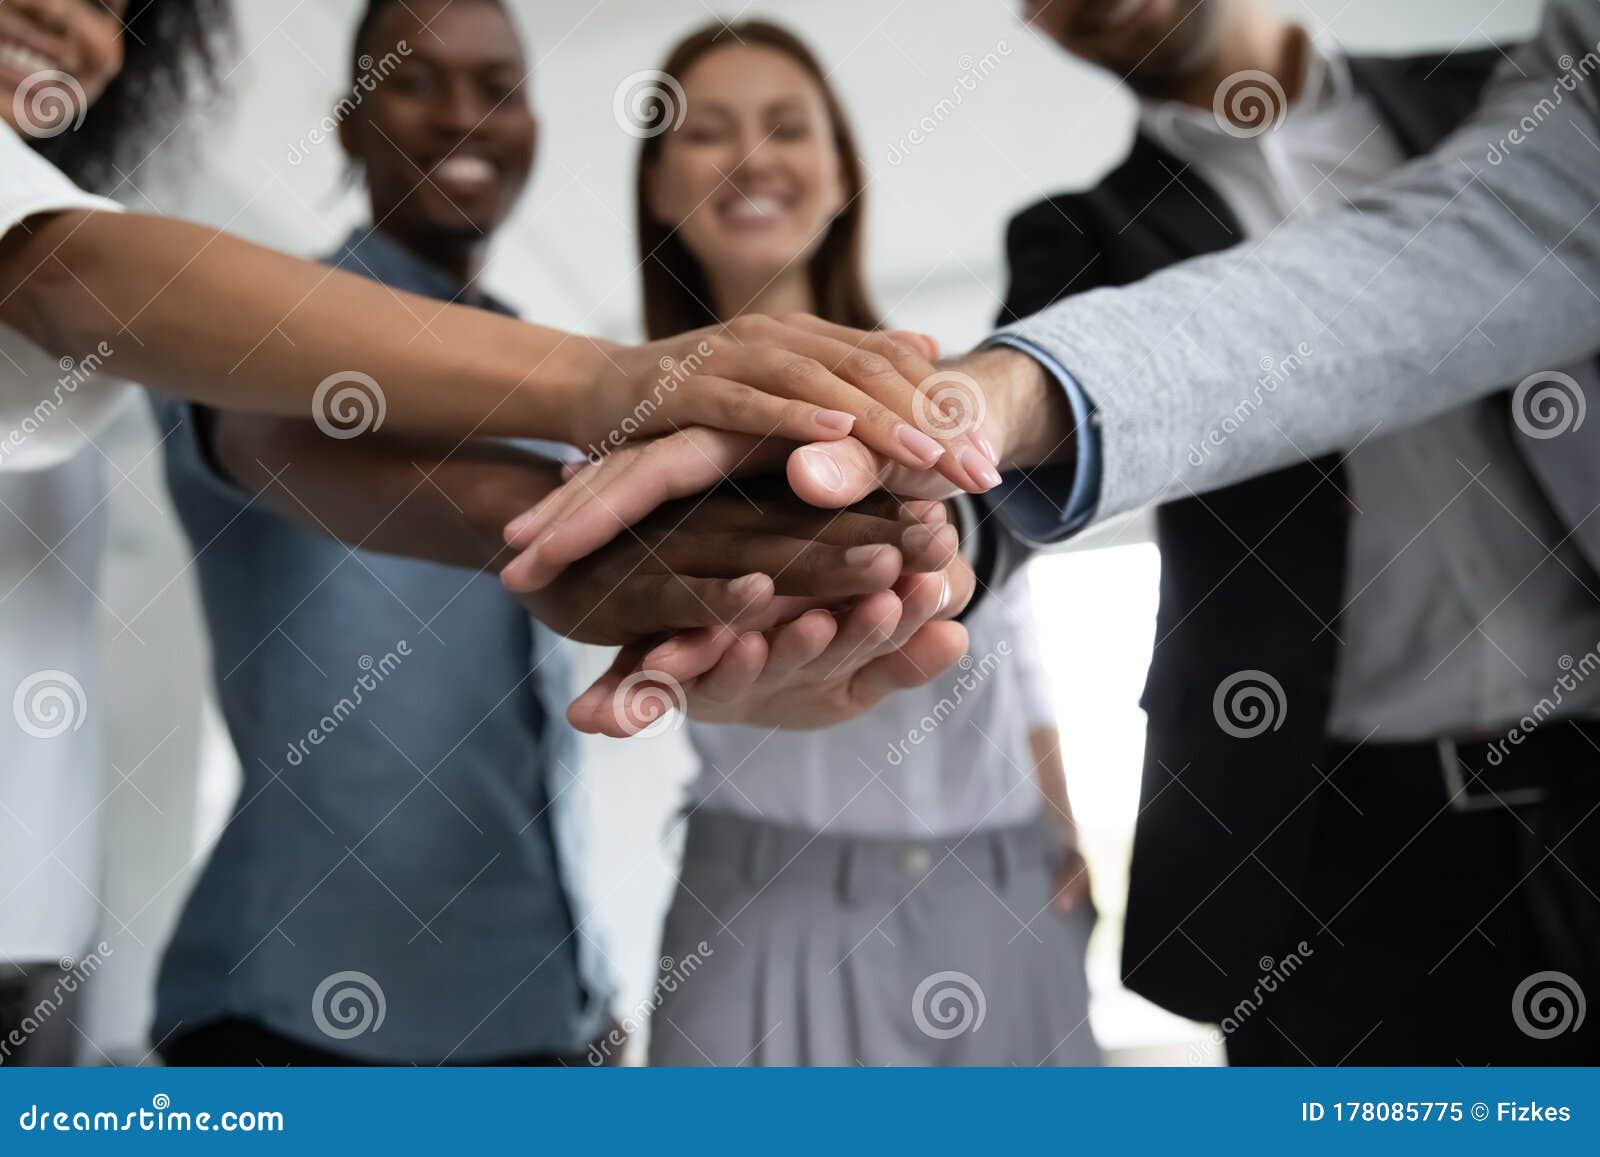 close up happy diverse business people putting hands together.